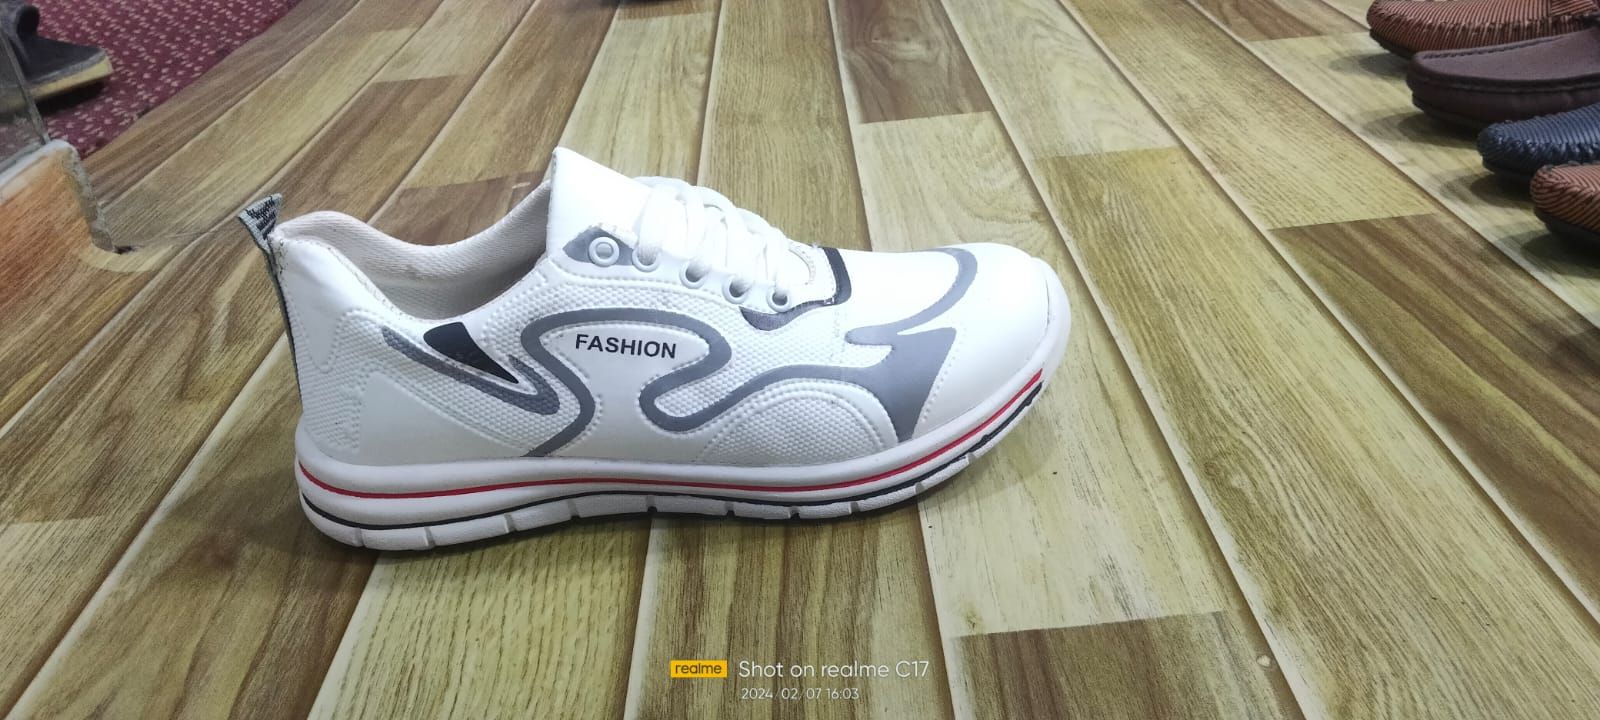 White Sneakers For Men White Shoes For Man Party Shoes Men Slip-on Shoes White Shoes For Men White Trainers For Men